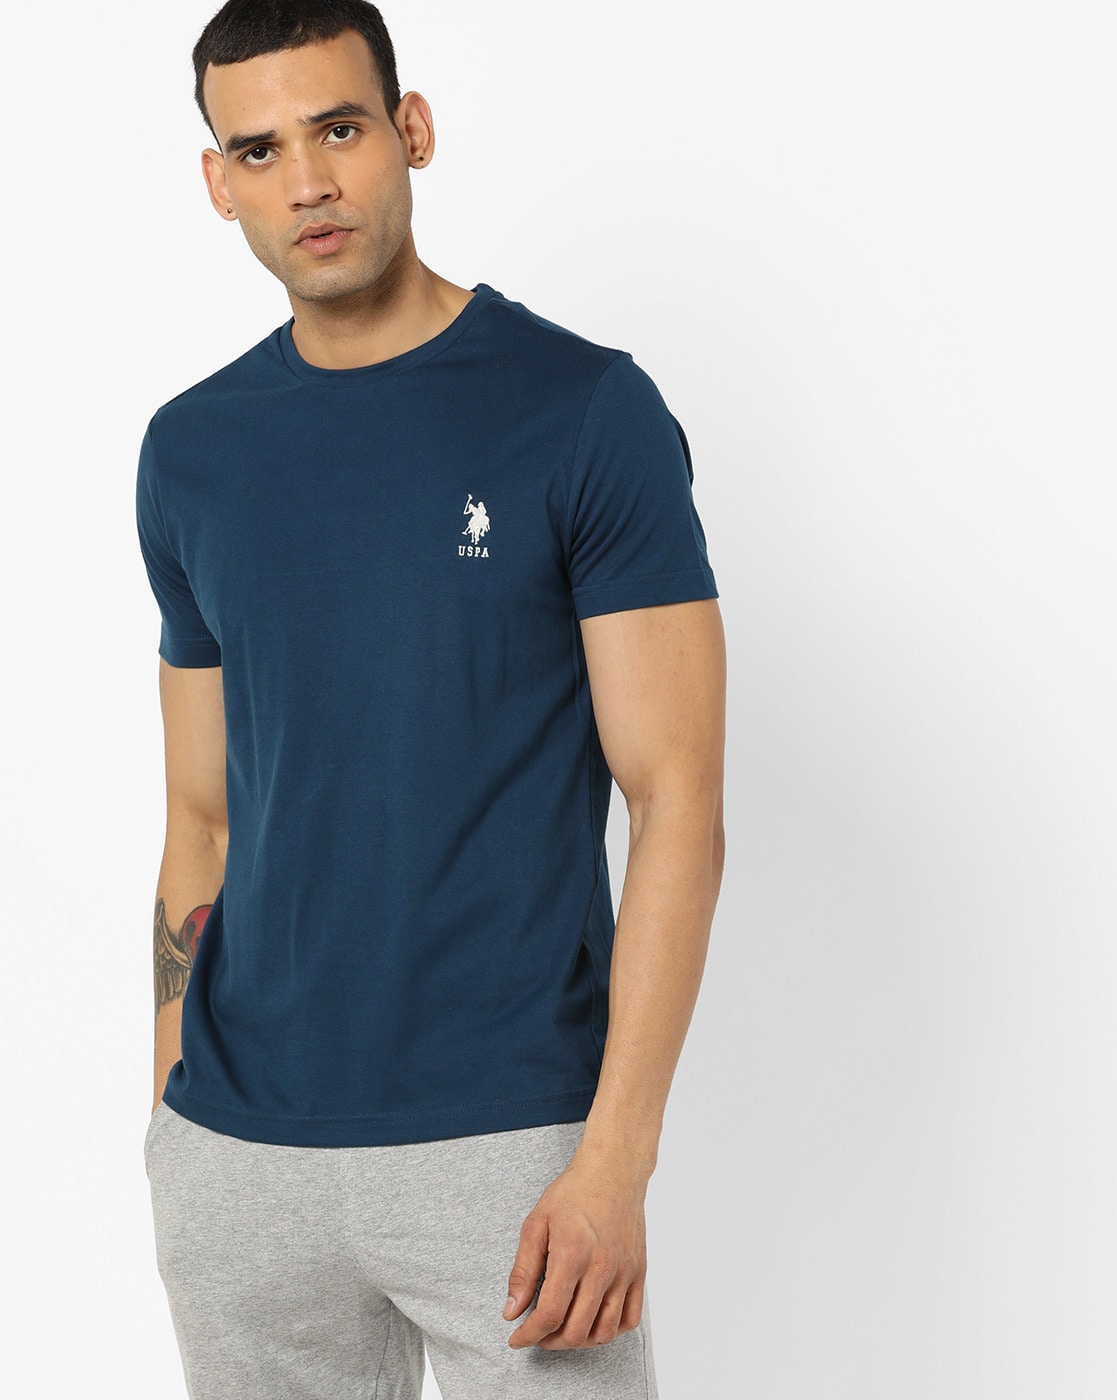 us polo assn t shirts online india